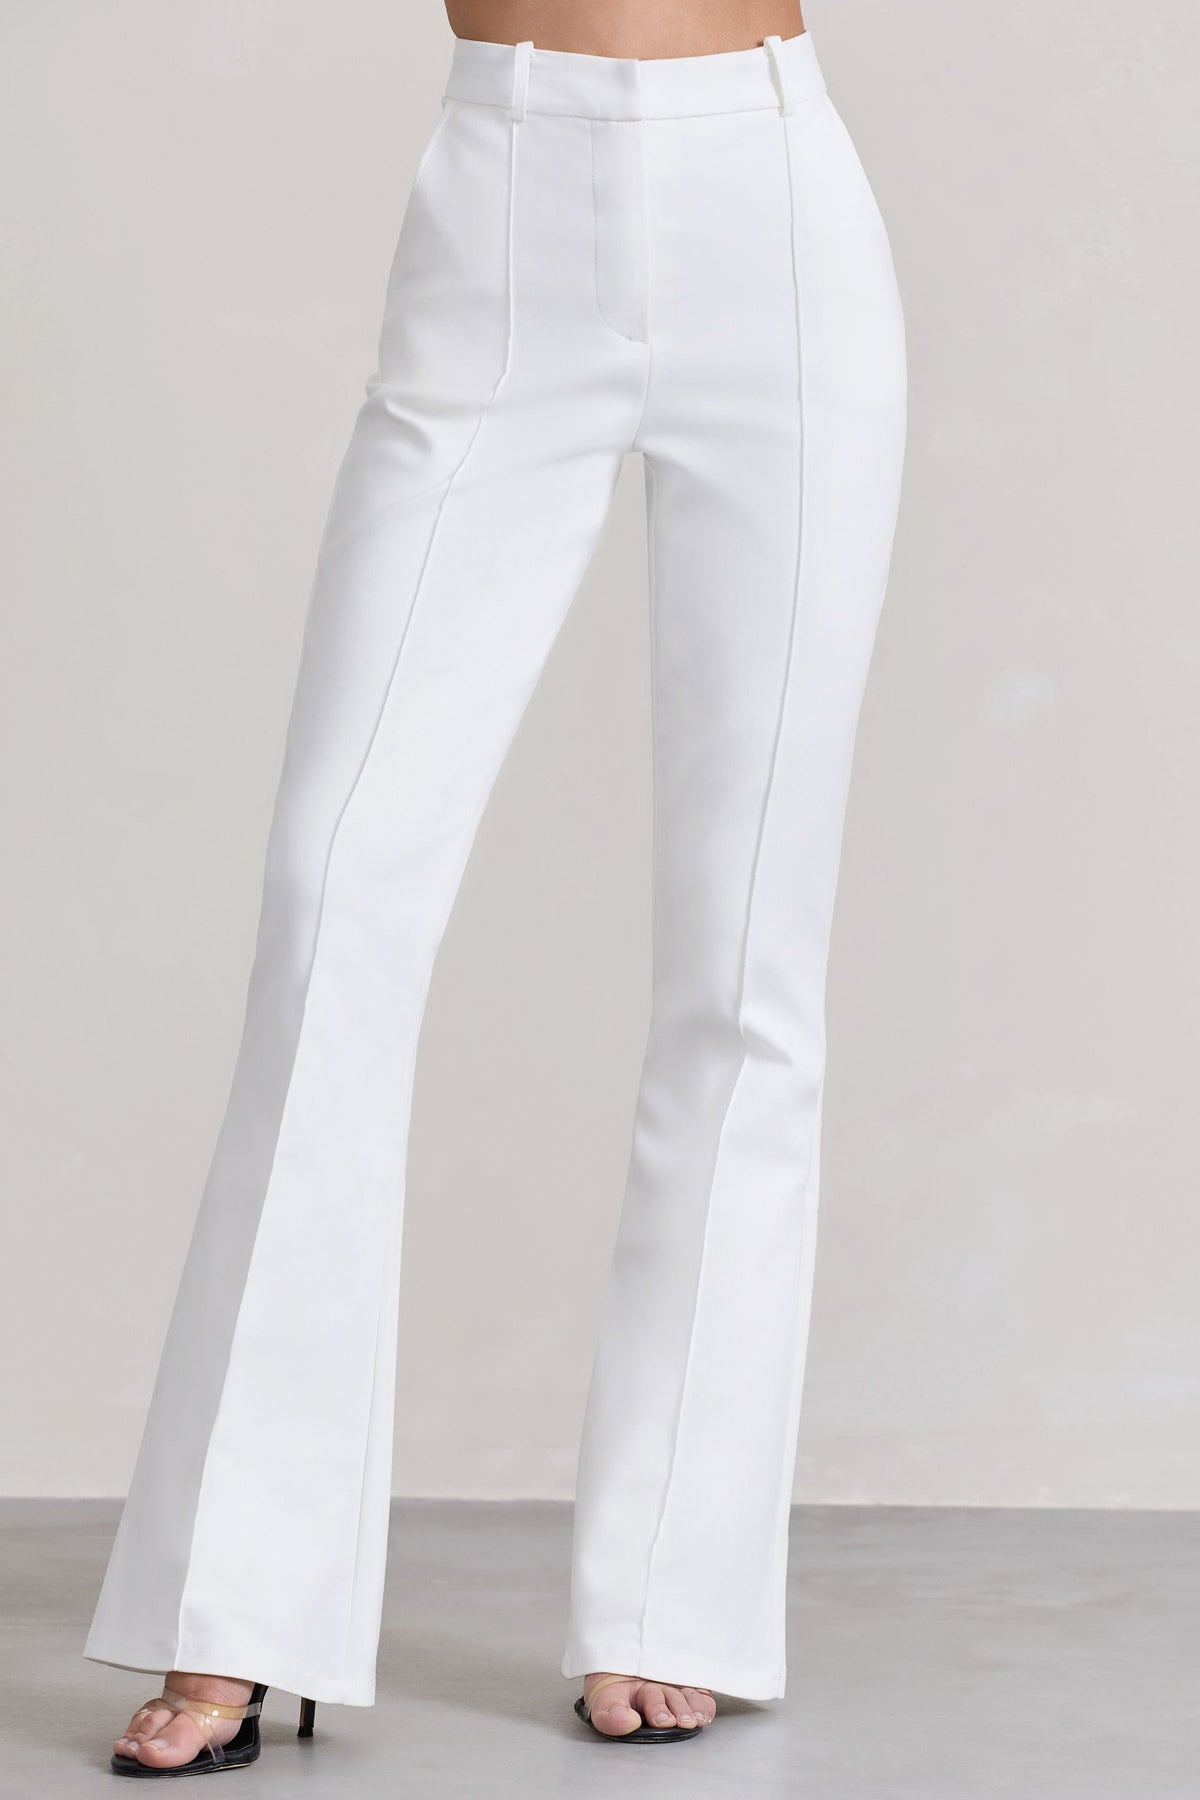 Mega Flare Jean in Clean White | 7 For All Mankind